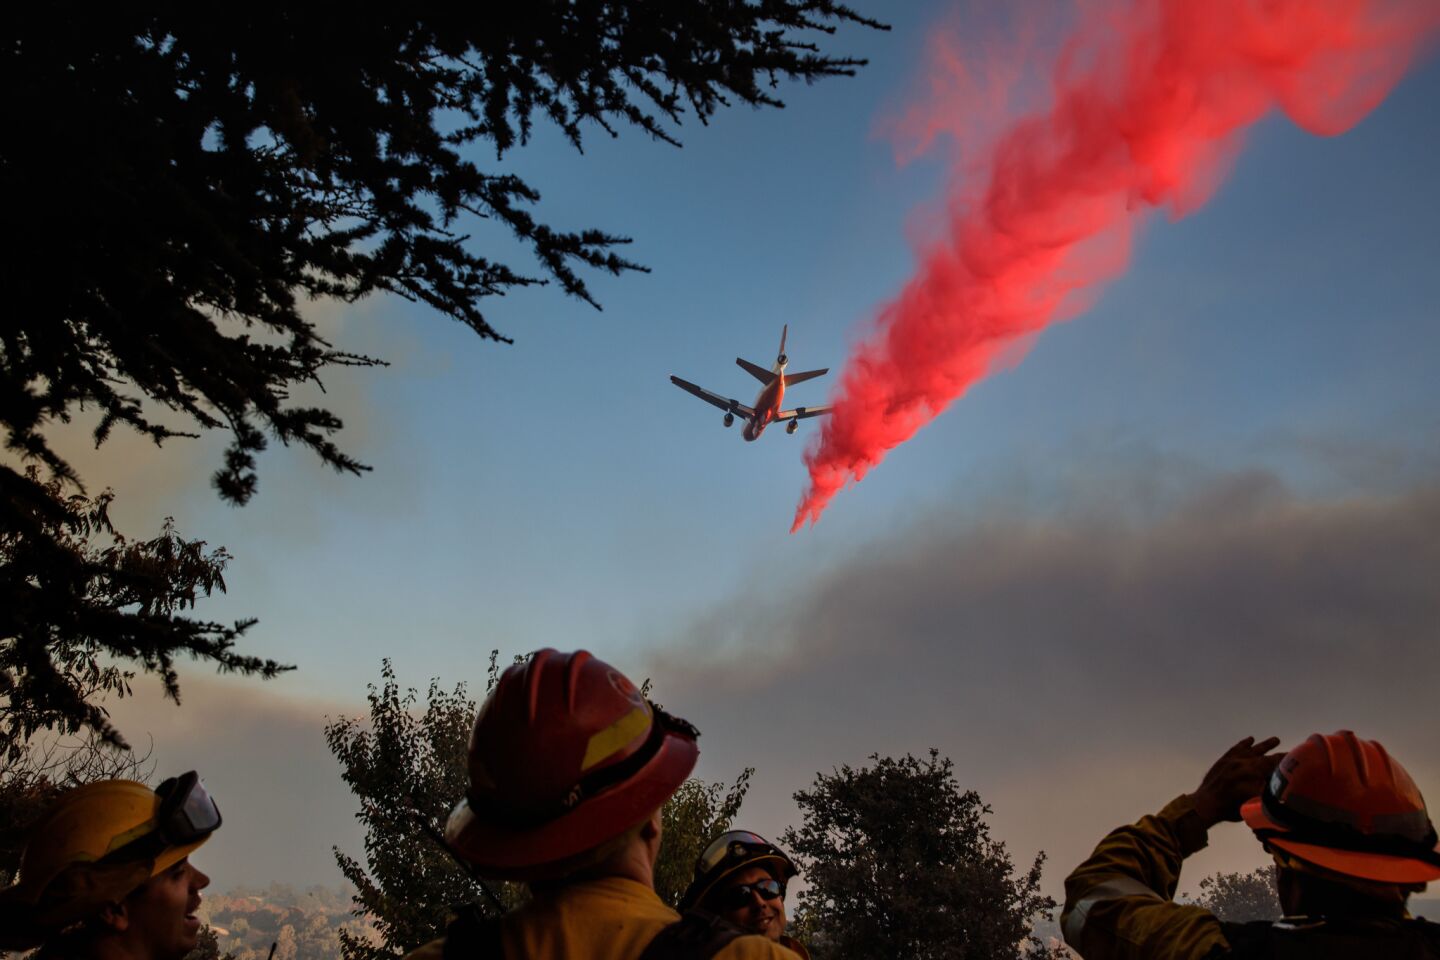 Firefighters watch as air tankers drop fire retardant ahead of the River fire in Lakeport, Calif., on Aug. 1.